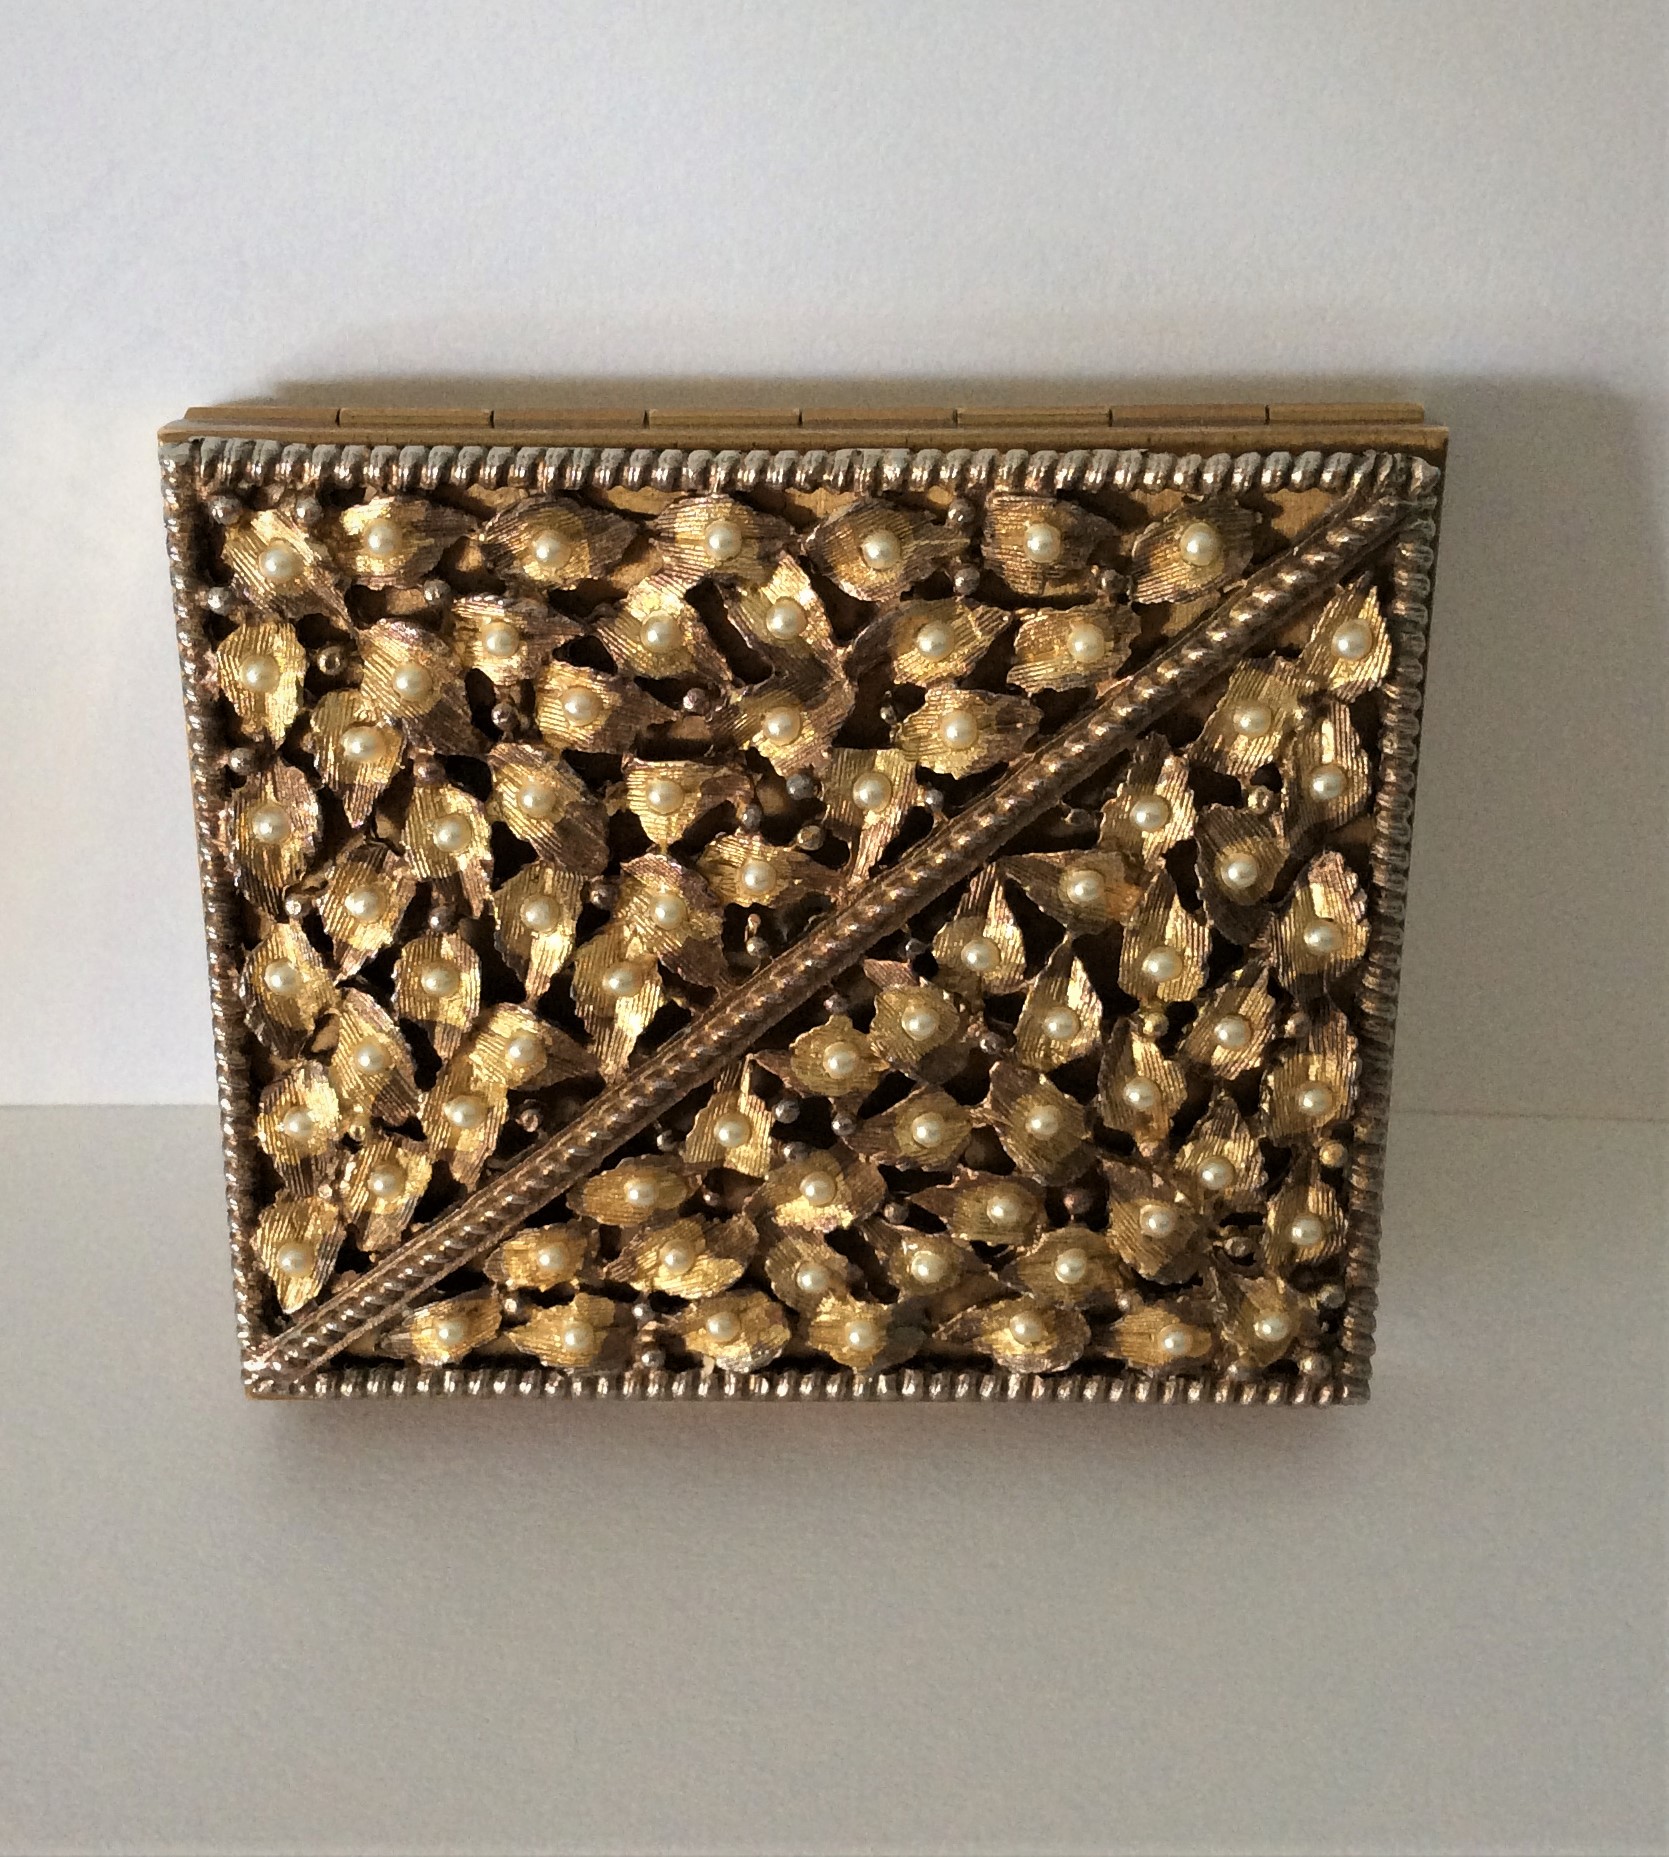 Vintage 50s Sam Fink Co. 5th Avenue Gold Tone Metal & Seed Pearl Rectangular Powder Compact with original sifter and signed puff.  Size: 6cm x 7cm Weight: 99g